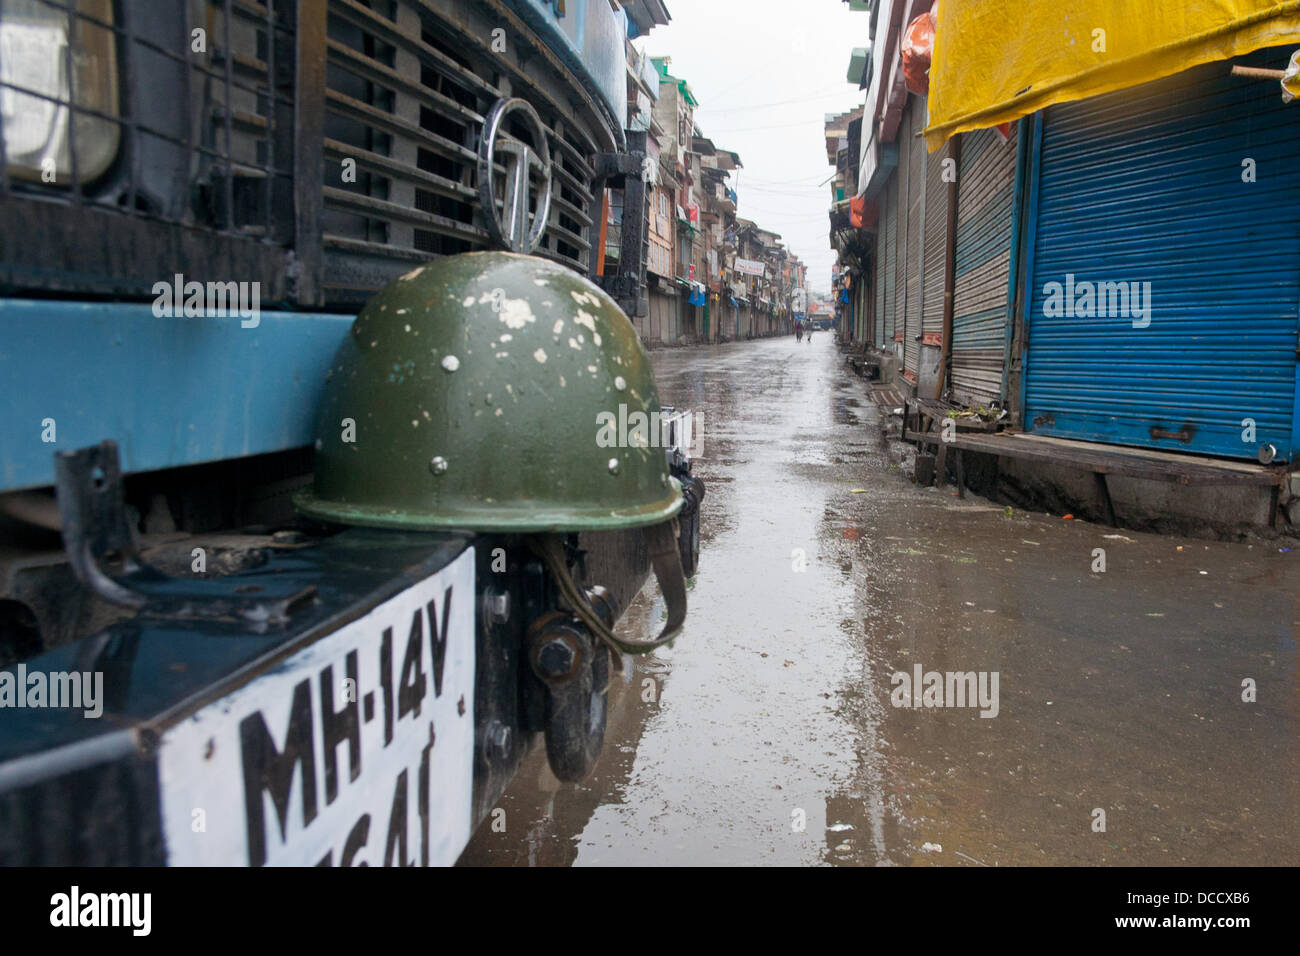 Srinagar, Indian Administered Kashmir 15th AUGUST 2013. A view of a deserted street during India's Independence Day in Srinagar, the summer capital city of Indian-administered Kashmir. Authorities had imposed restrictions even as a complete shutdown was observed in the disputed Himalyan region on the call of pro-independence groups as a mark of protest . (Sofi Suhail/ Alamy Live News) Stock Photo